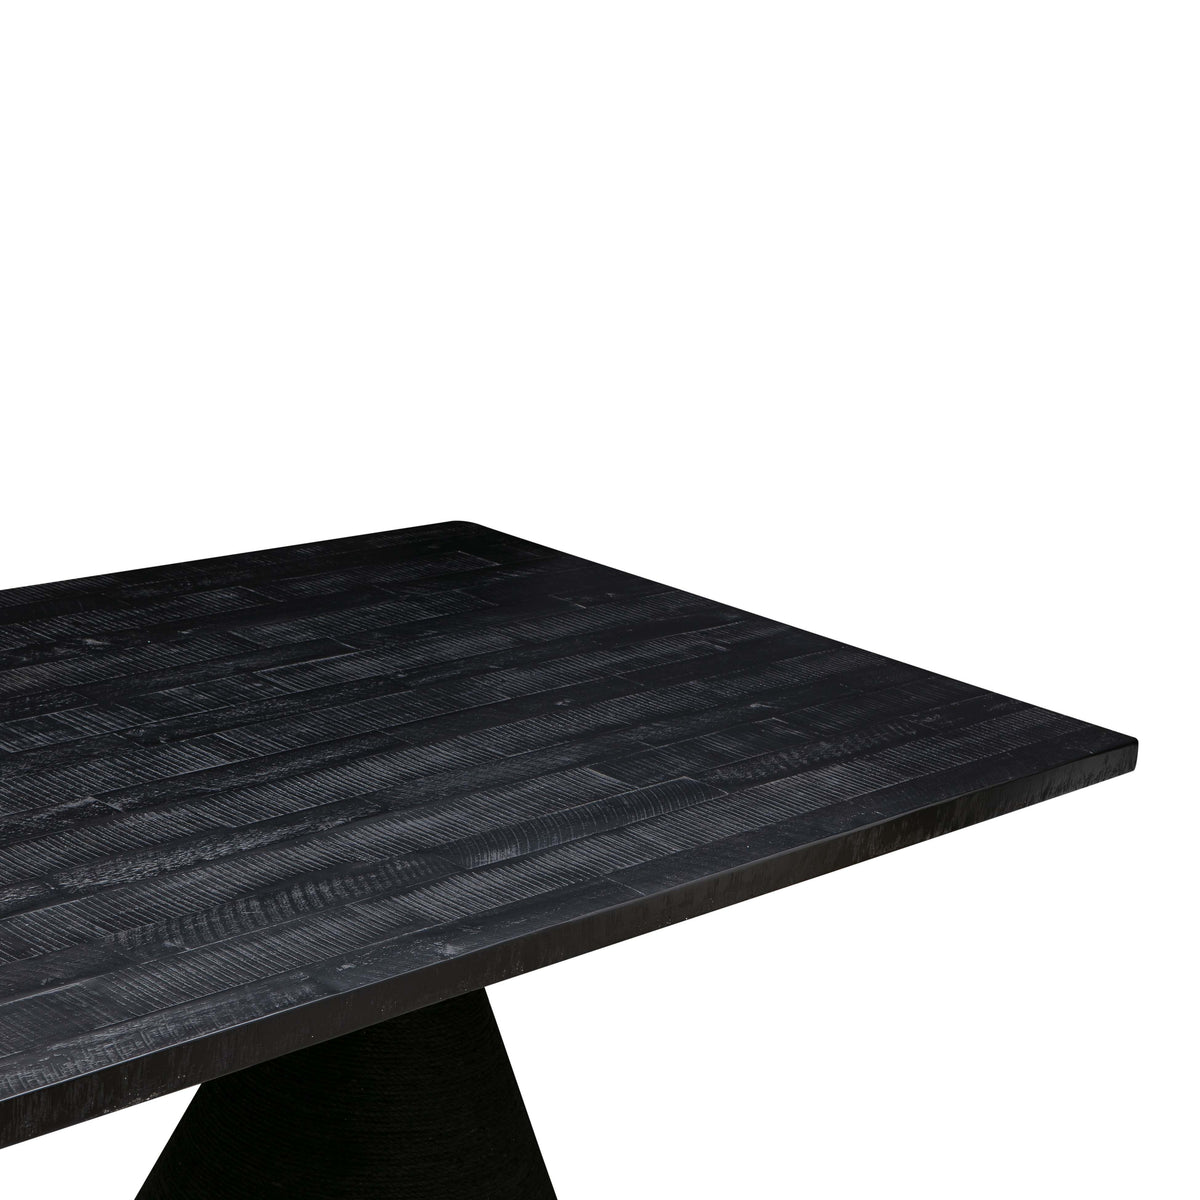 Tiam Black Rope Rectangular Dining Table - Luxury Living Collection